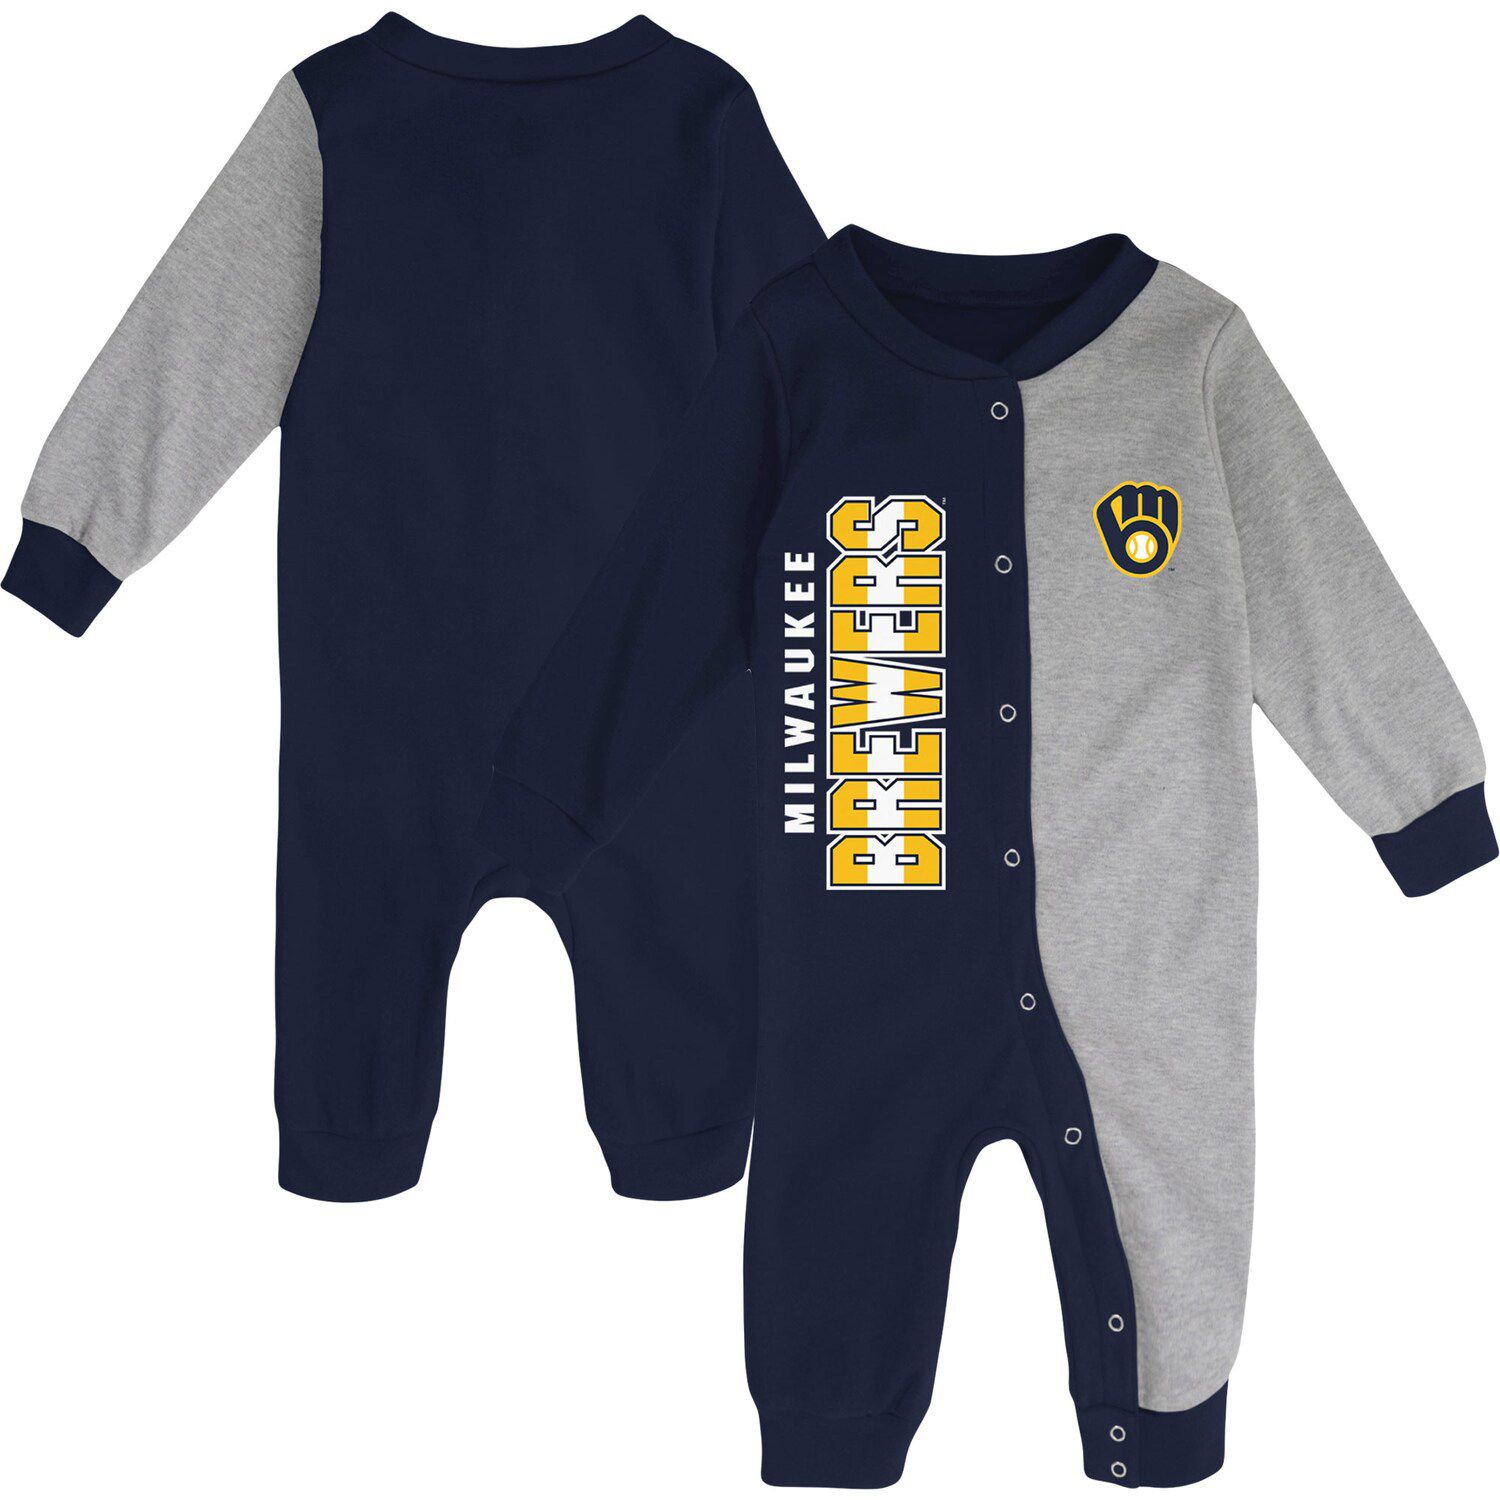 Outerstuff Girls Newborn & Infant Navy/Heathered Gray Detroit Tigers Scream & Shout Two-Pack Bodysuit Set